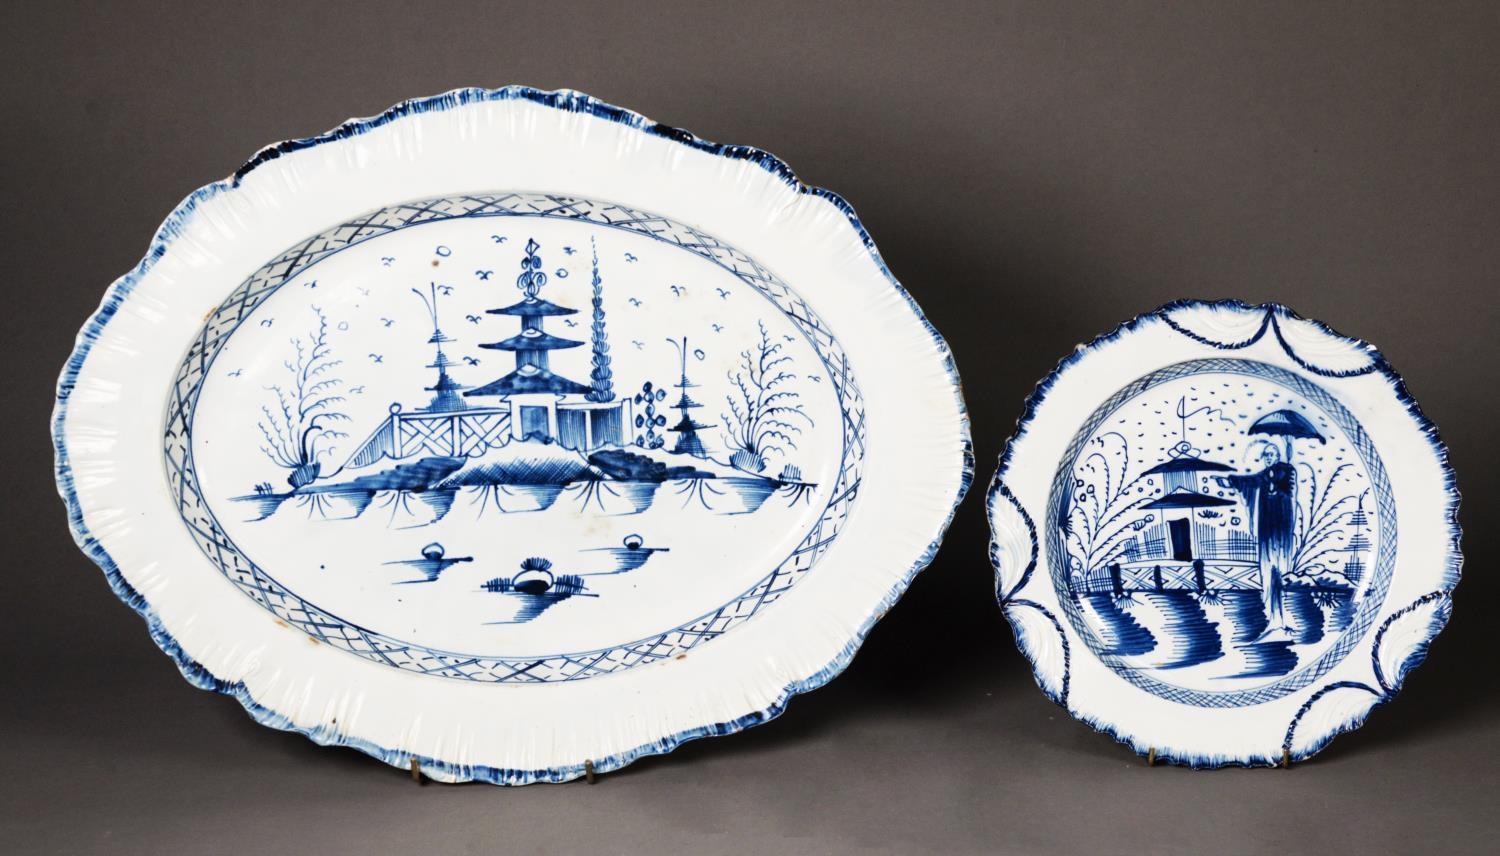 PROBABLY LIVERPOOL, LATE EIGHTEENTH CENTURY BLUE AND WHITE FEATHER EDGED PEARLWARE POTTERY